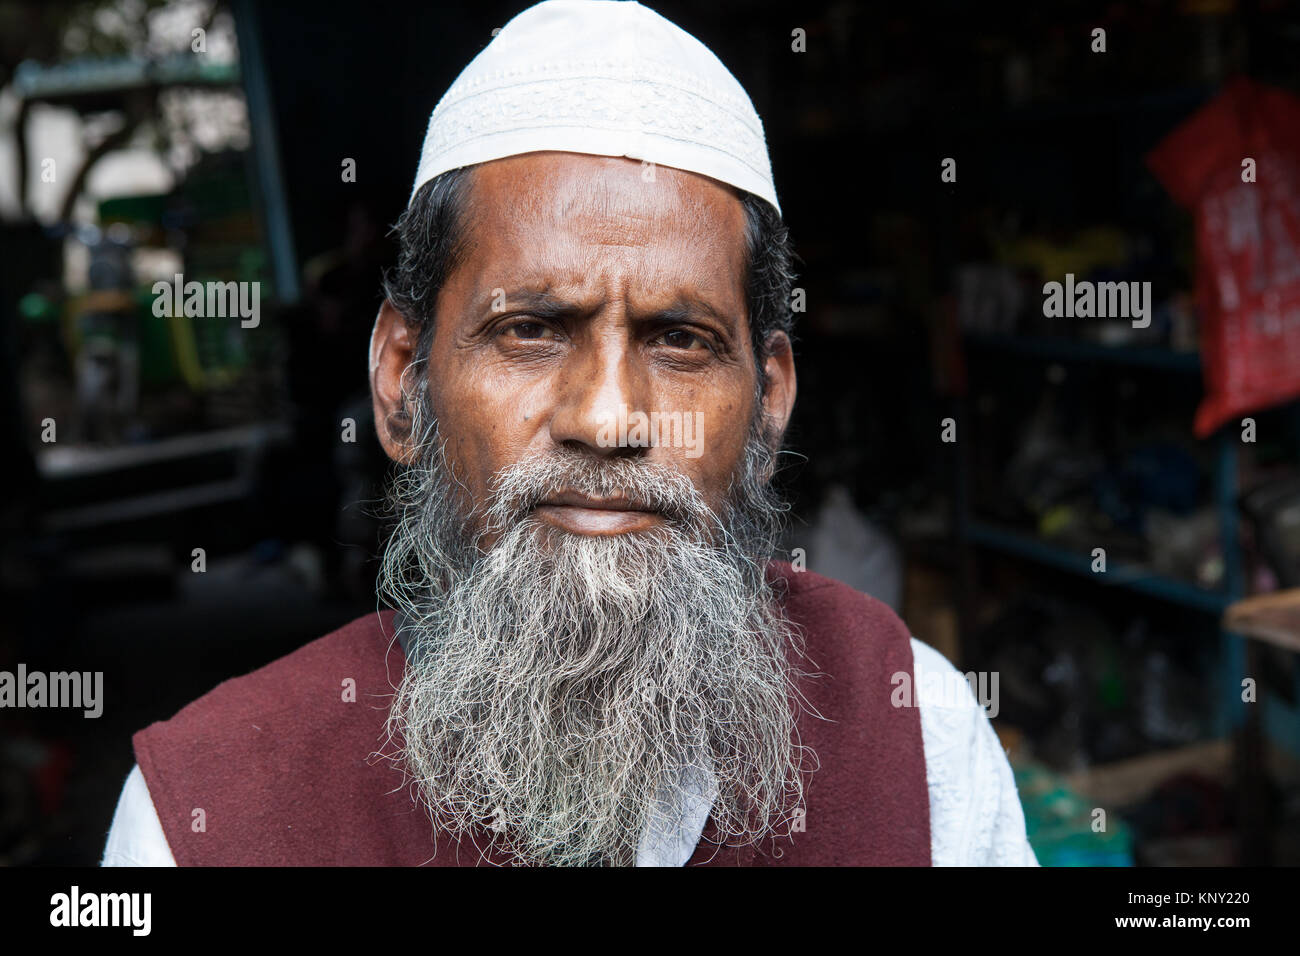 Portrait of an elderly Muslim man in Lucknow, India Stock Photo